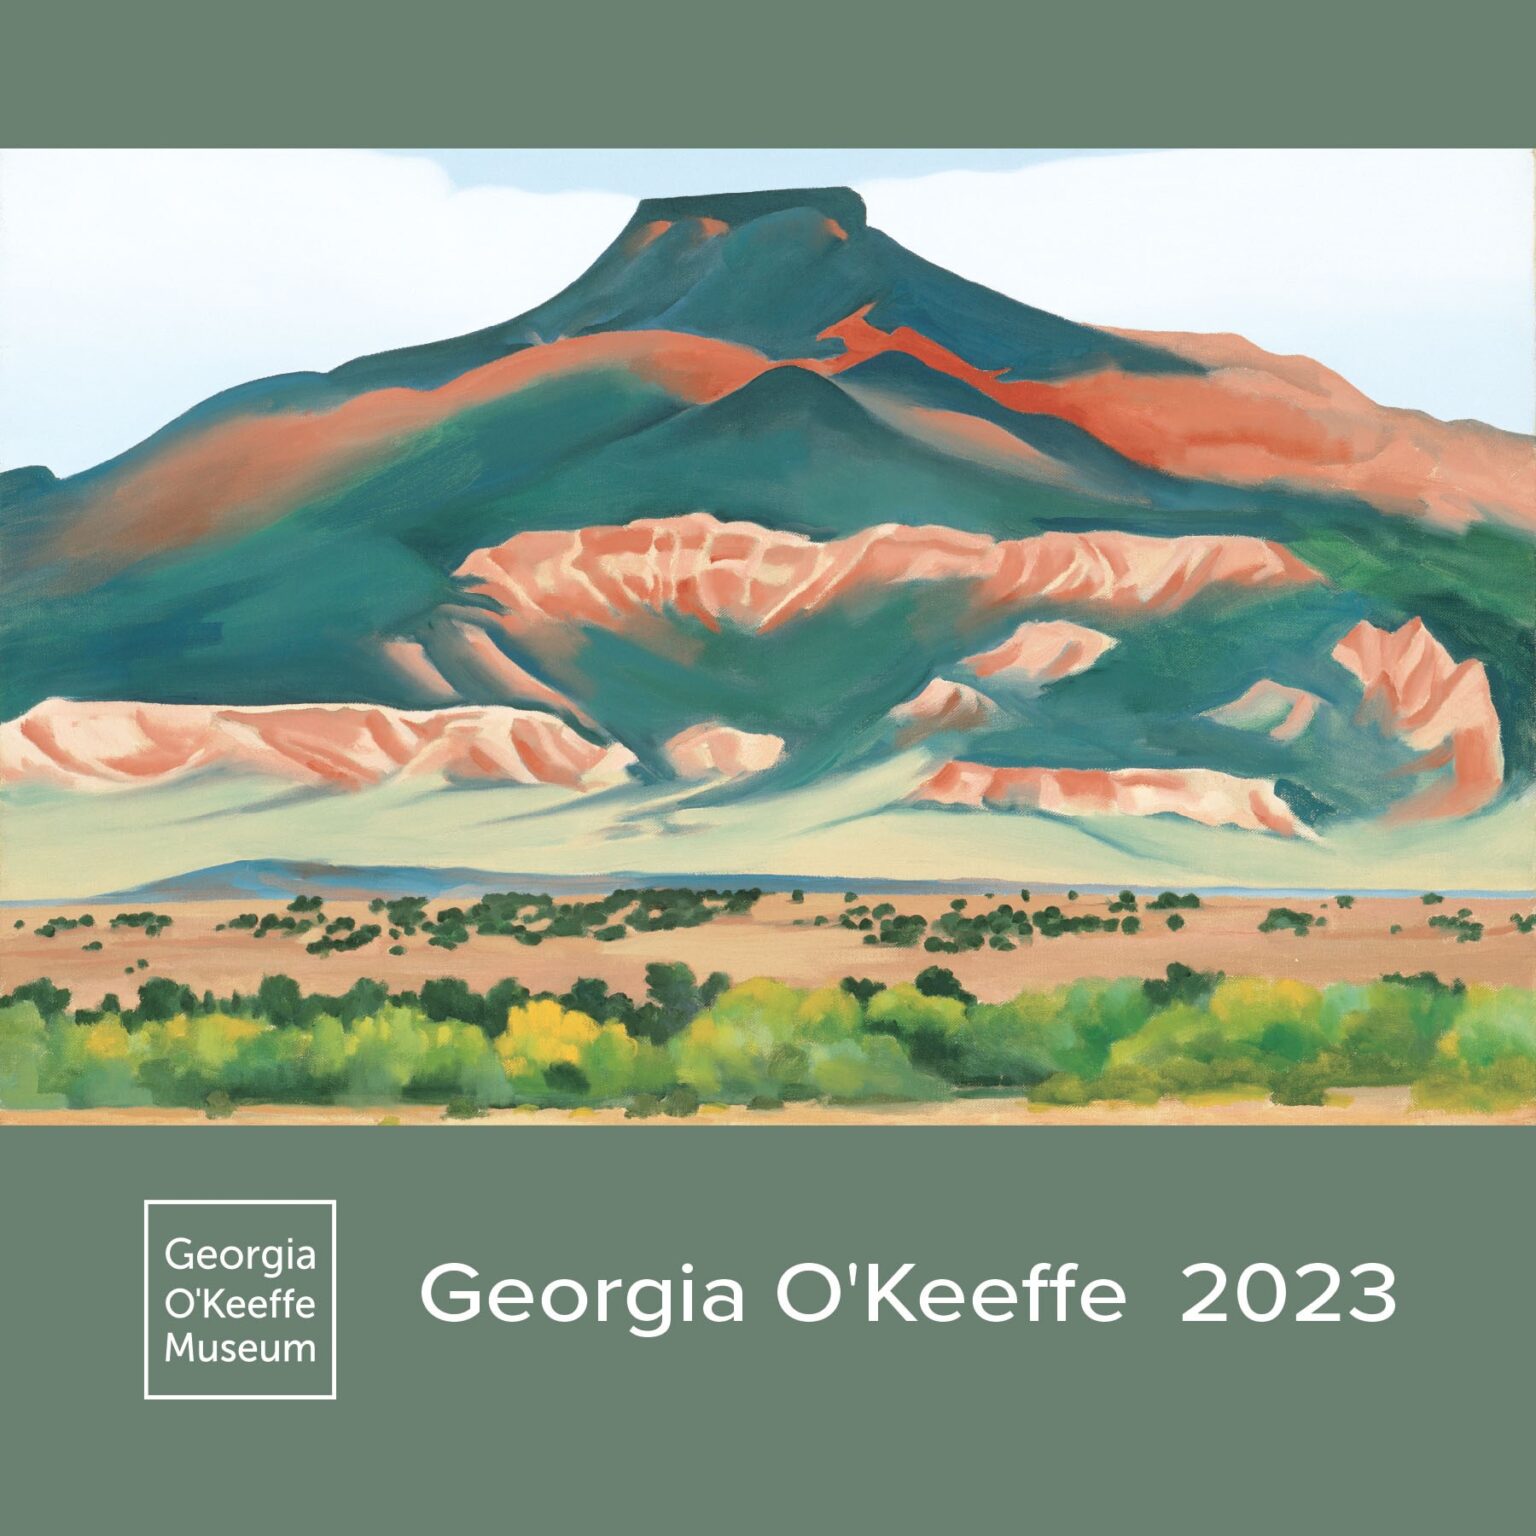 calendars-miscellaneous-archives-the-georgia-o-keeffe-museum